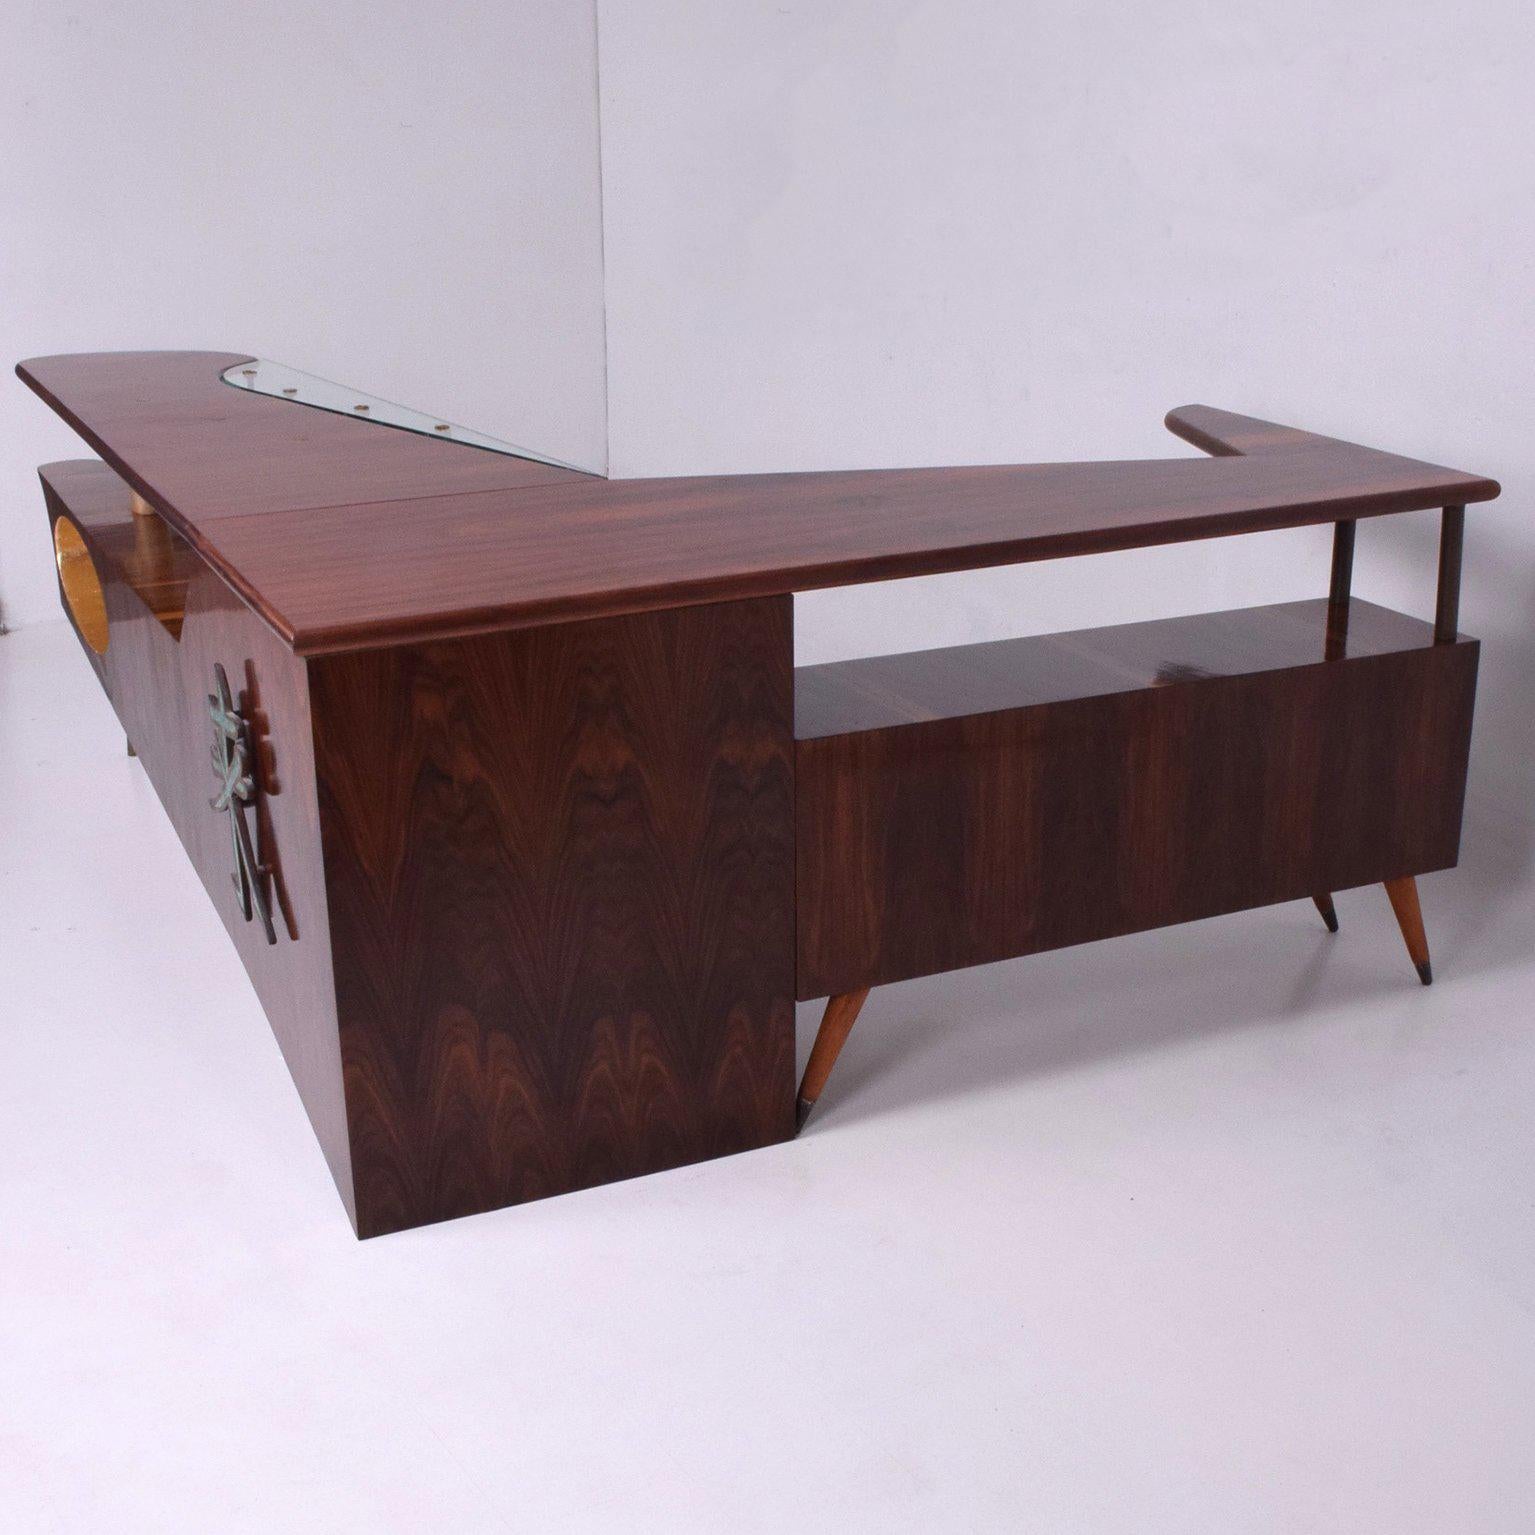 For your consideration a Mid-Century desk or bar in rosewood and parchment with bronze applications, designed by Frank Kyle. Hardware made by the foundry of Pepe Mendoza, with foundry marks.  
The desk is custom made. Mexico Circa 1950s. 
Beautiful